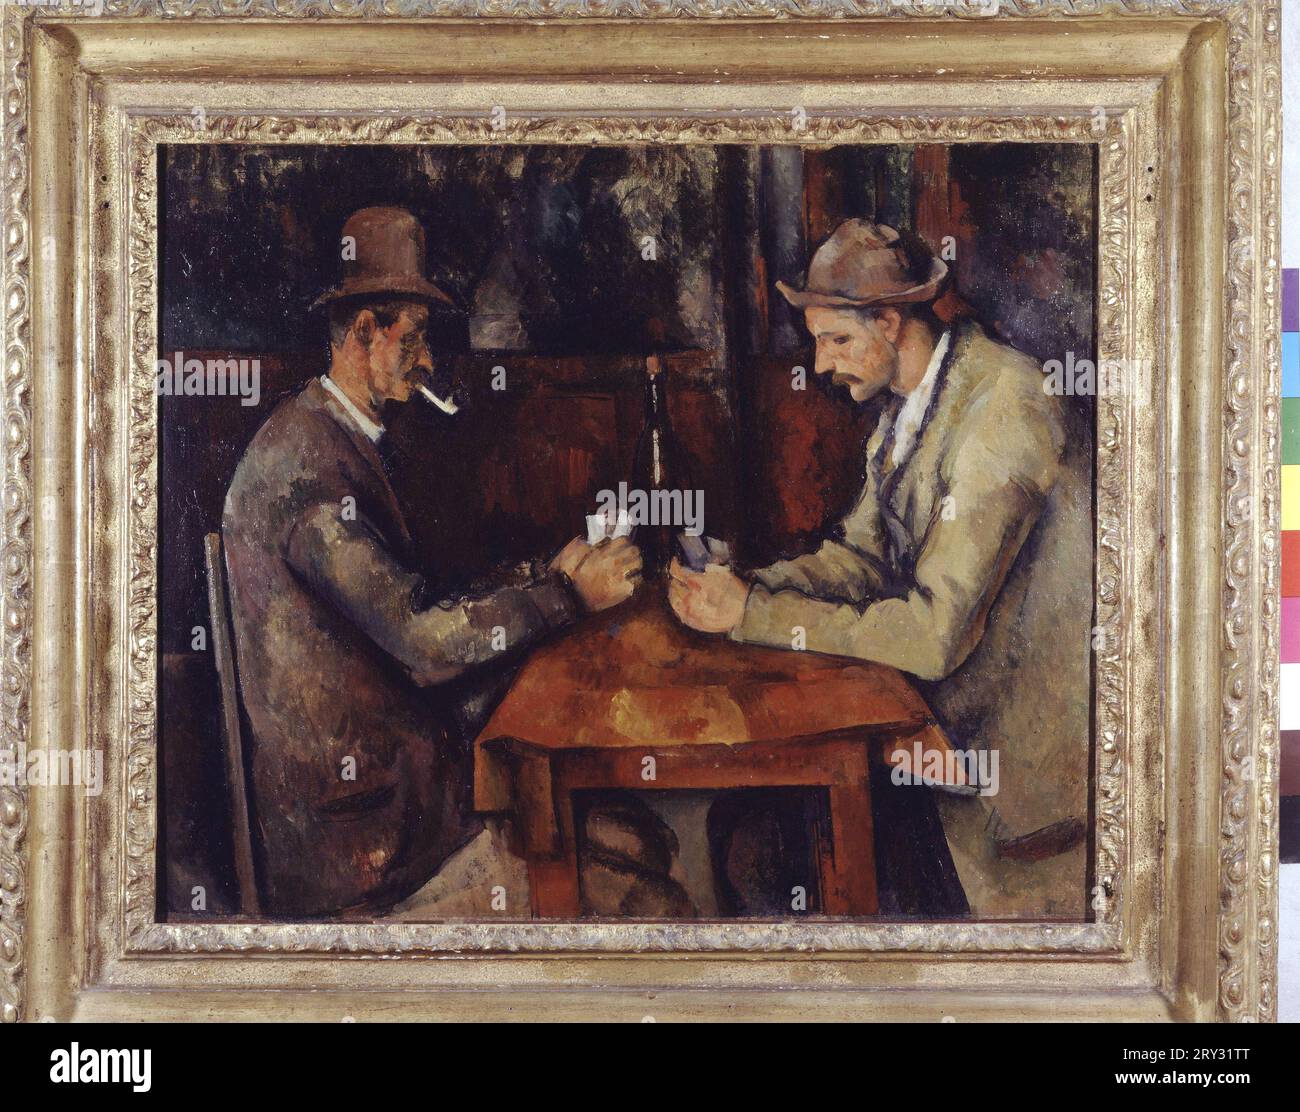 The card players - Les joueurs de carte - by Paul Cezanne, 1890-95, Musee d'Orsay Stock Photo